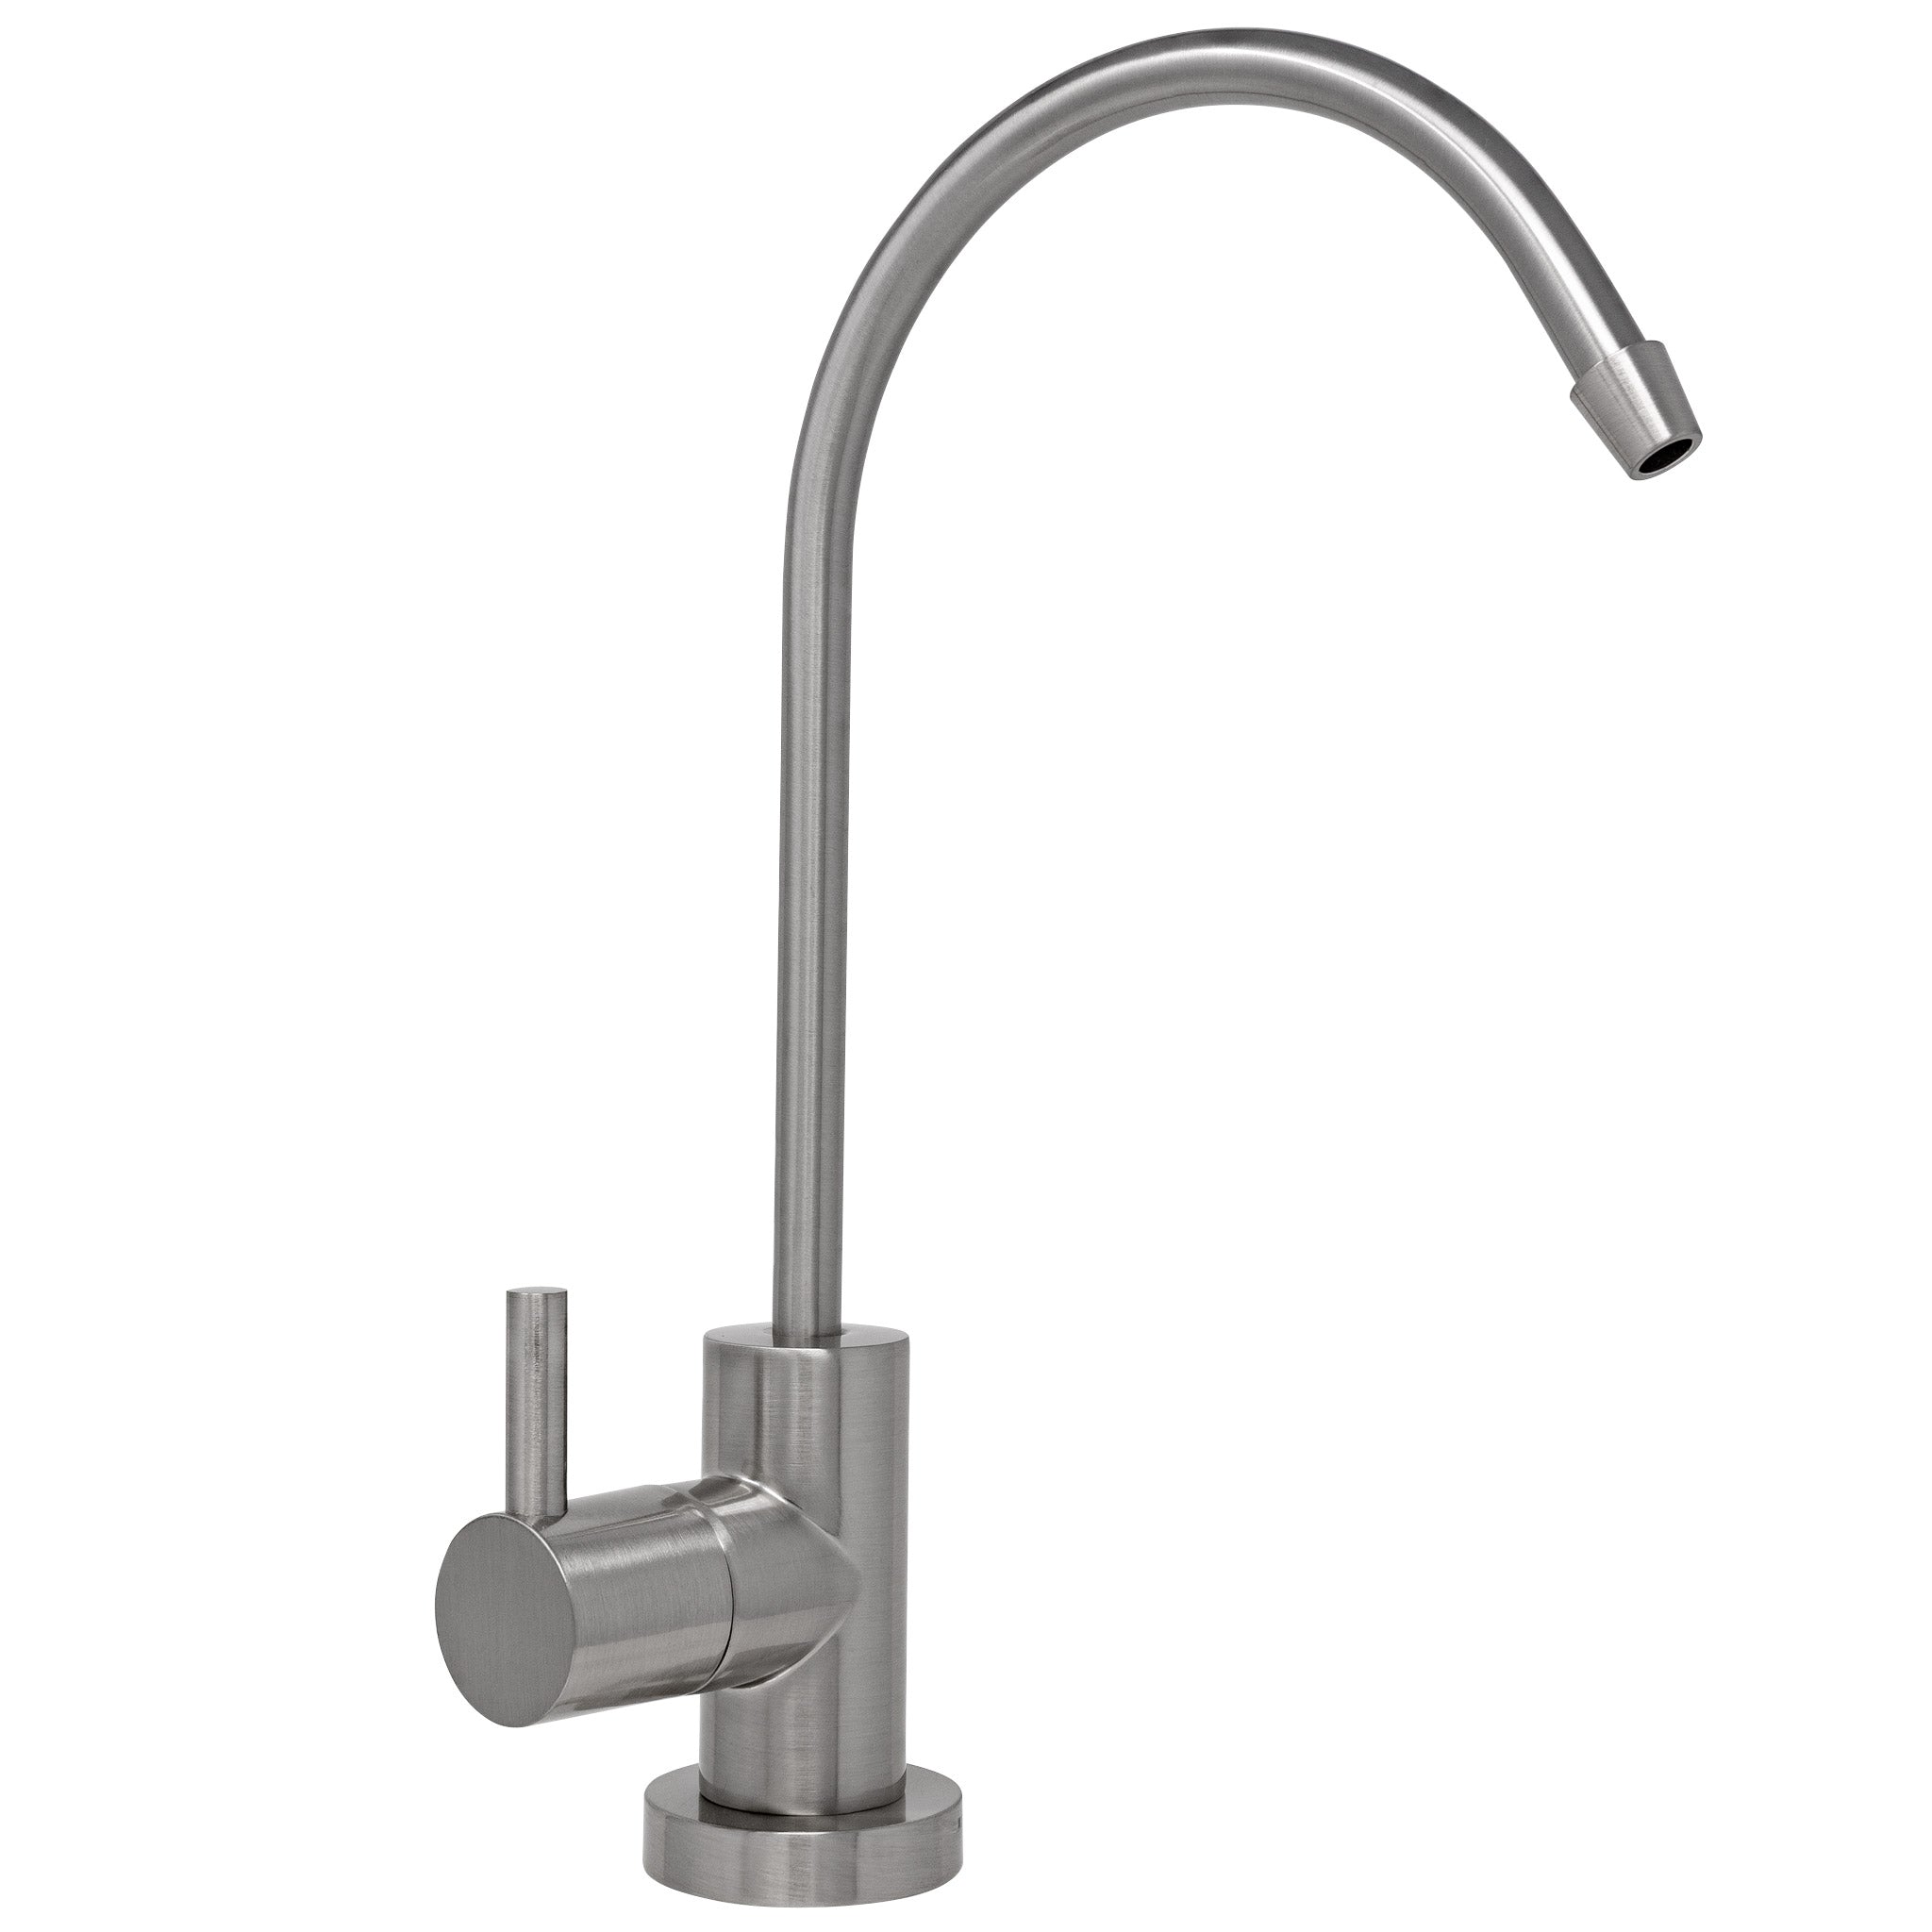 Water Filtration Faucet Brushed Nickel Euro Style Reverse Osmosis Non Air Gap. Certified by NSF.